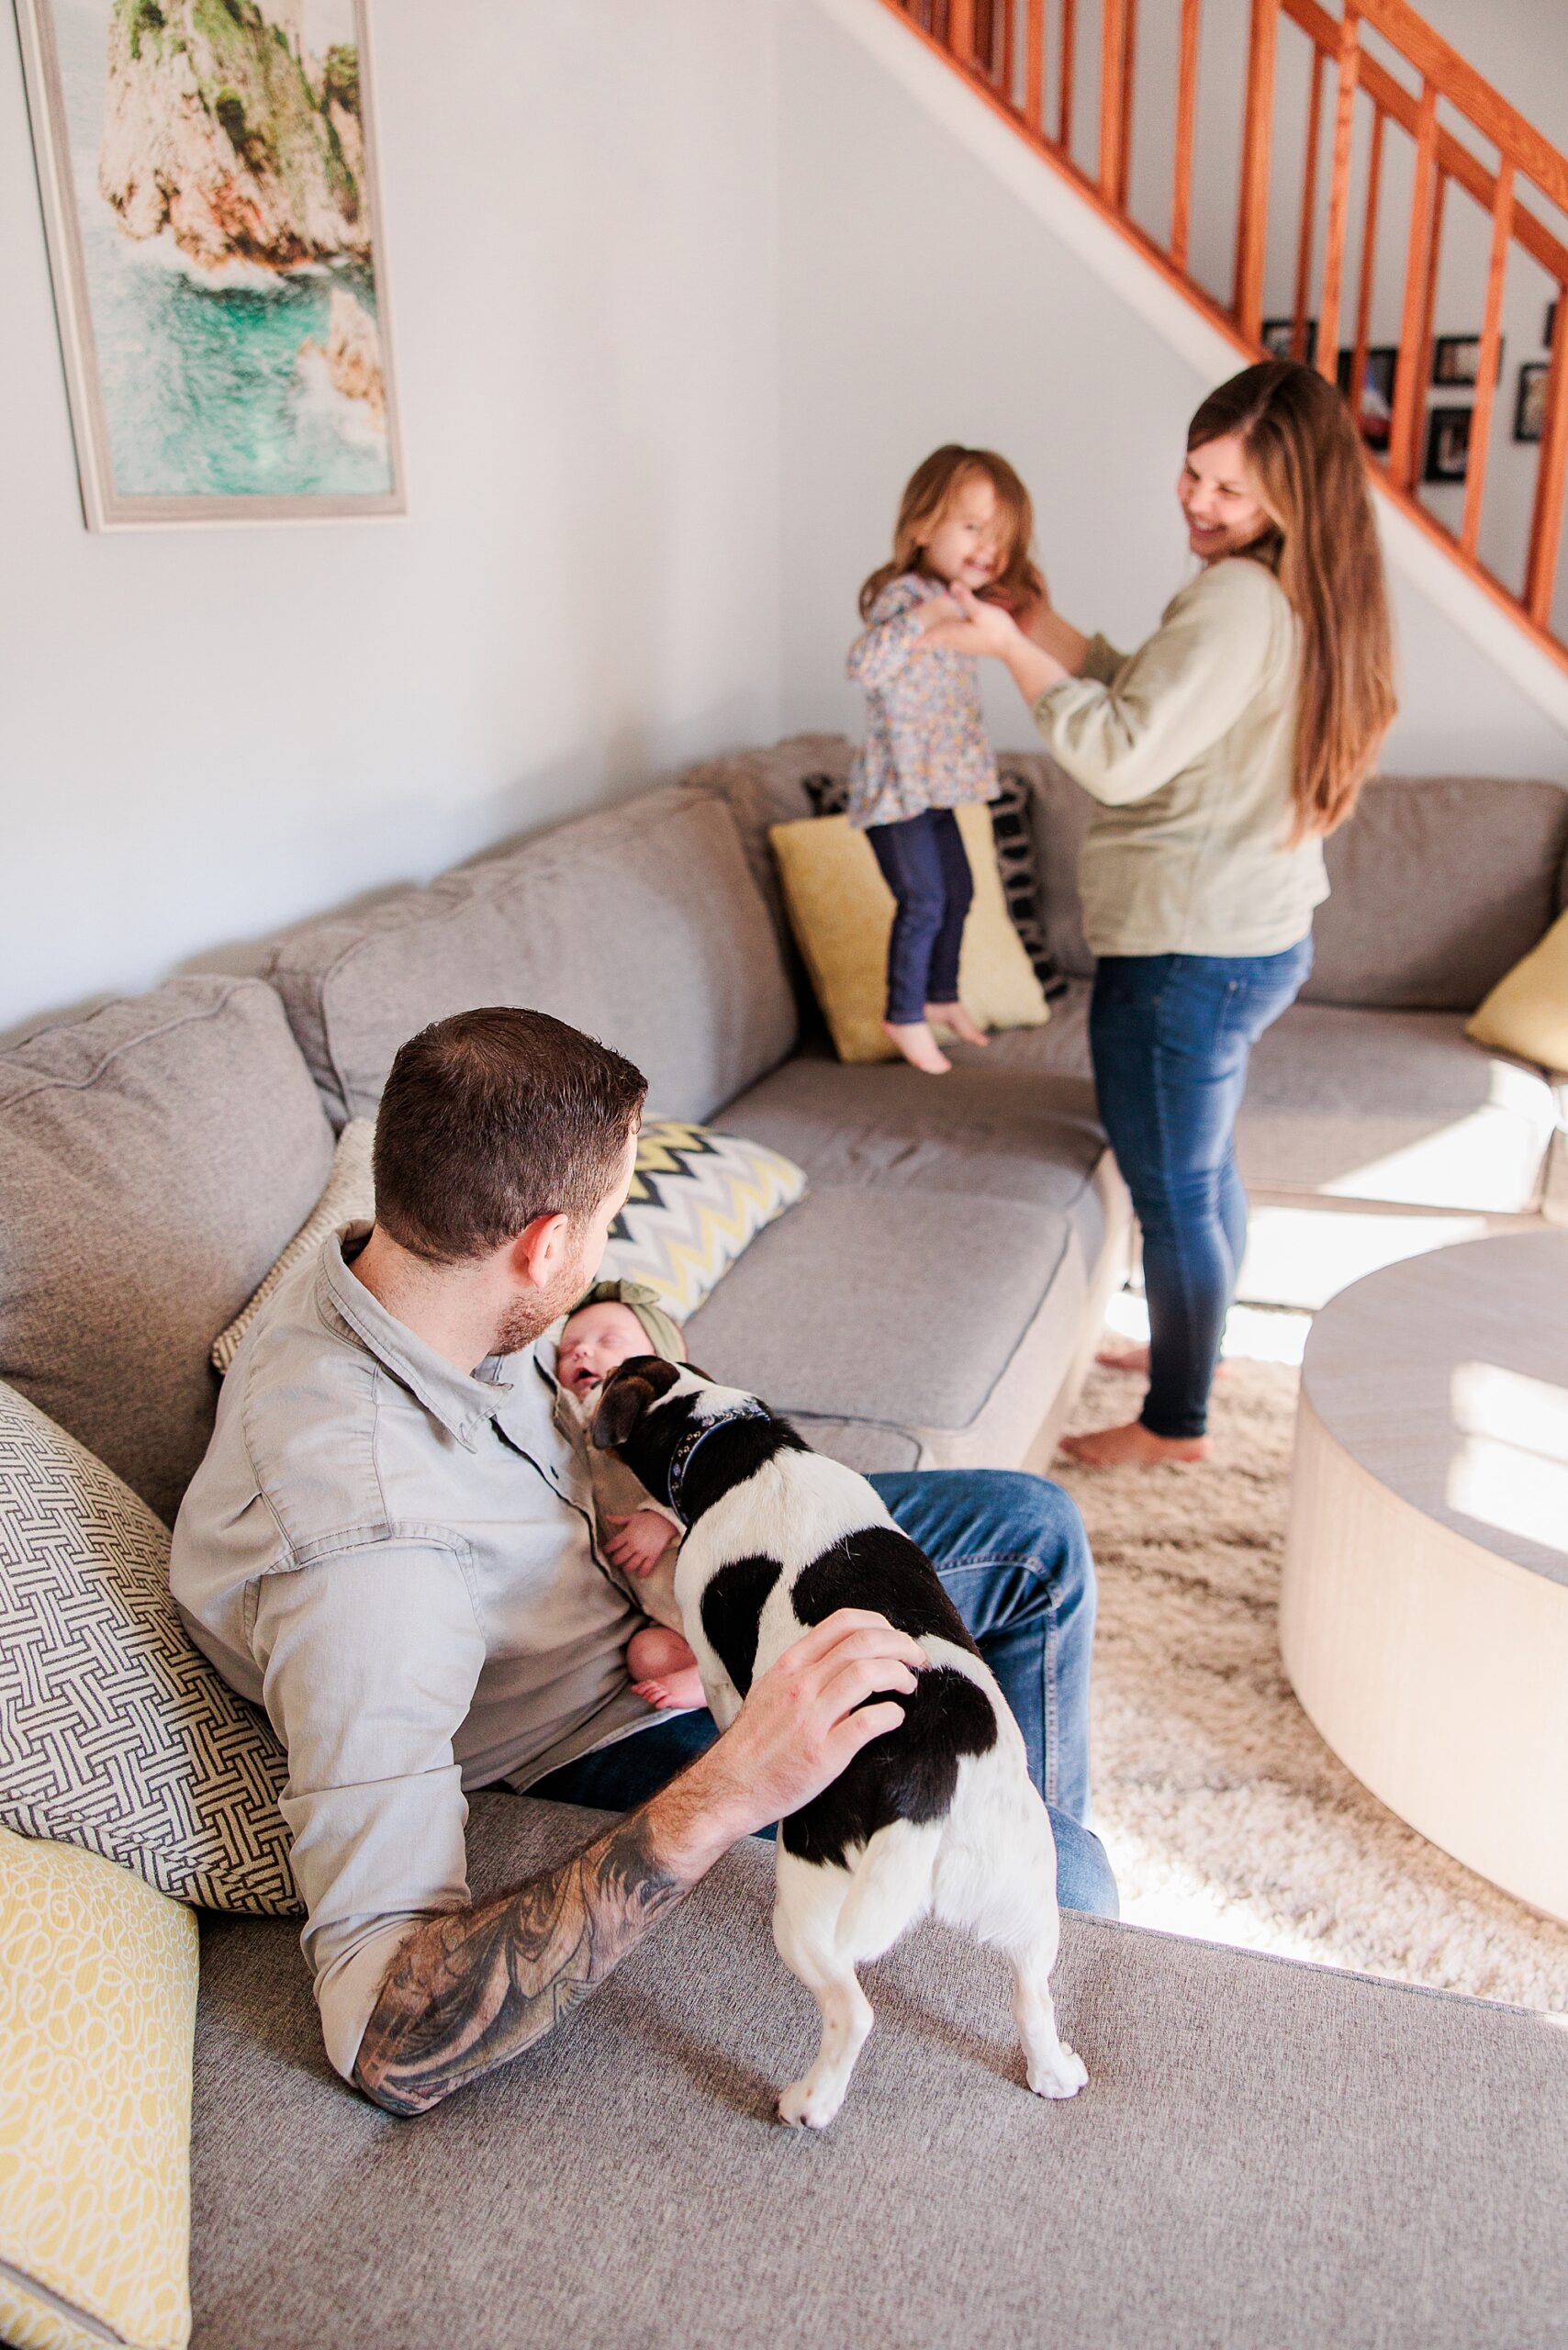 parents play with toddler and dog while holding newborn baby girl on couch